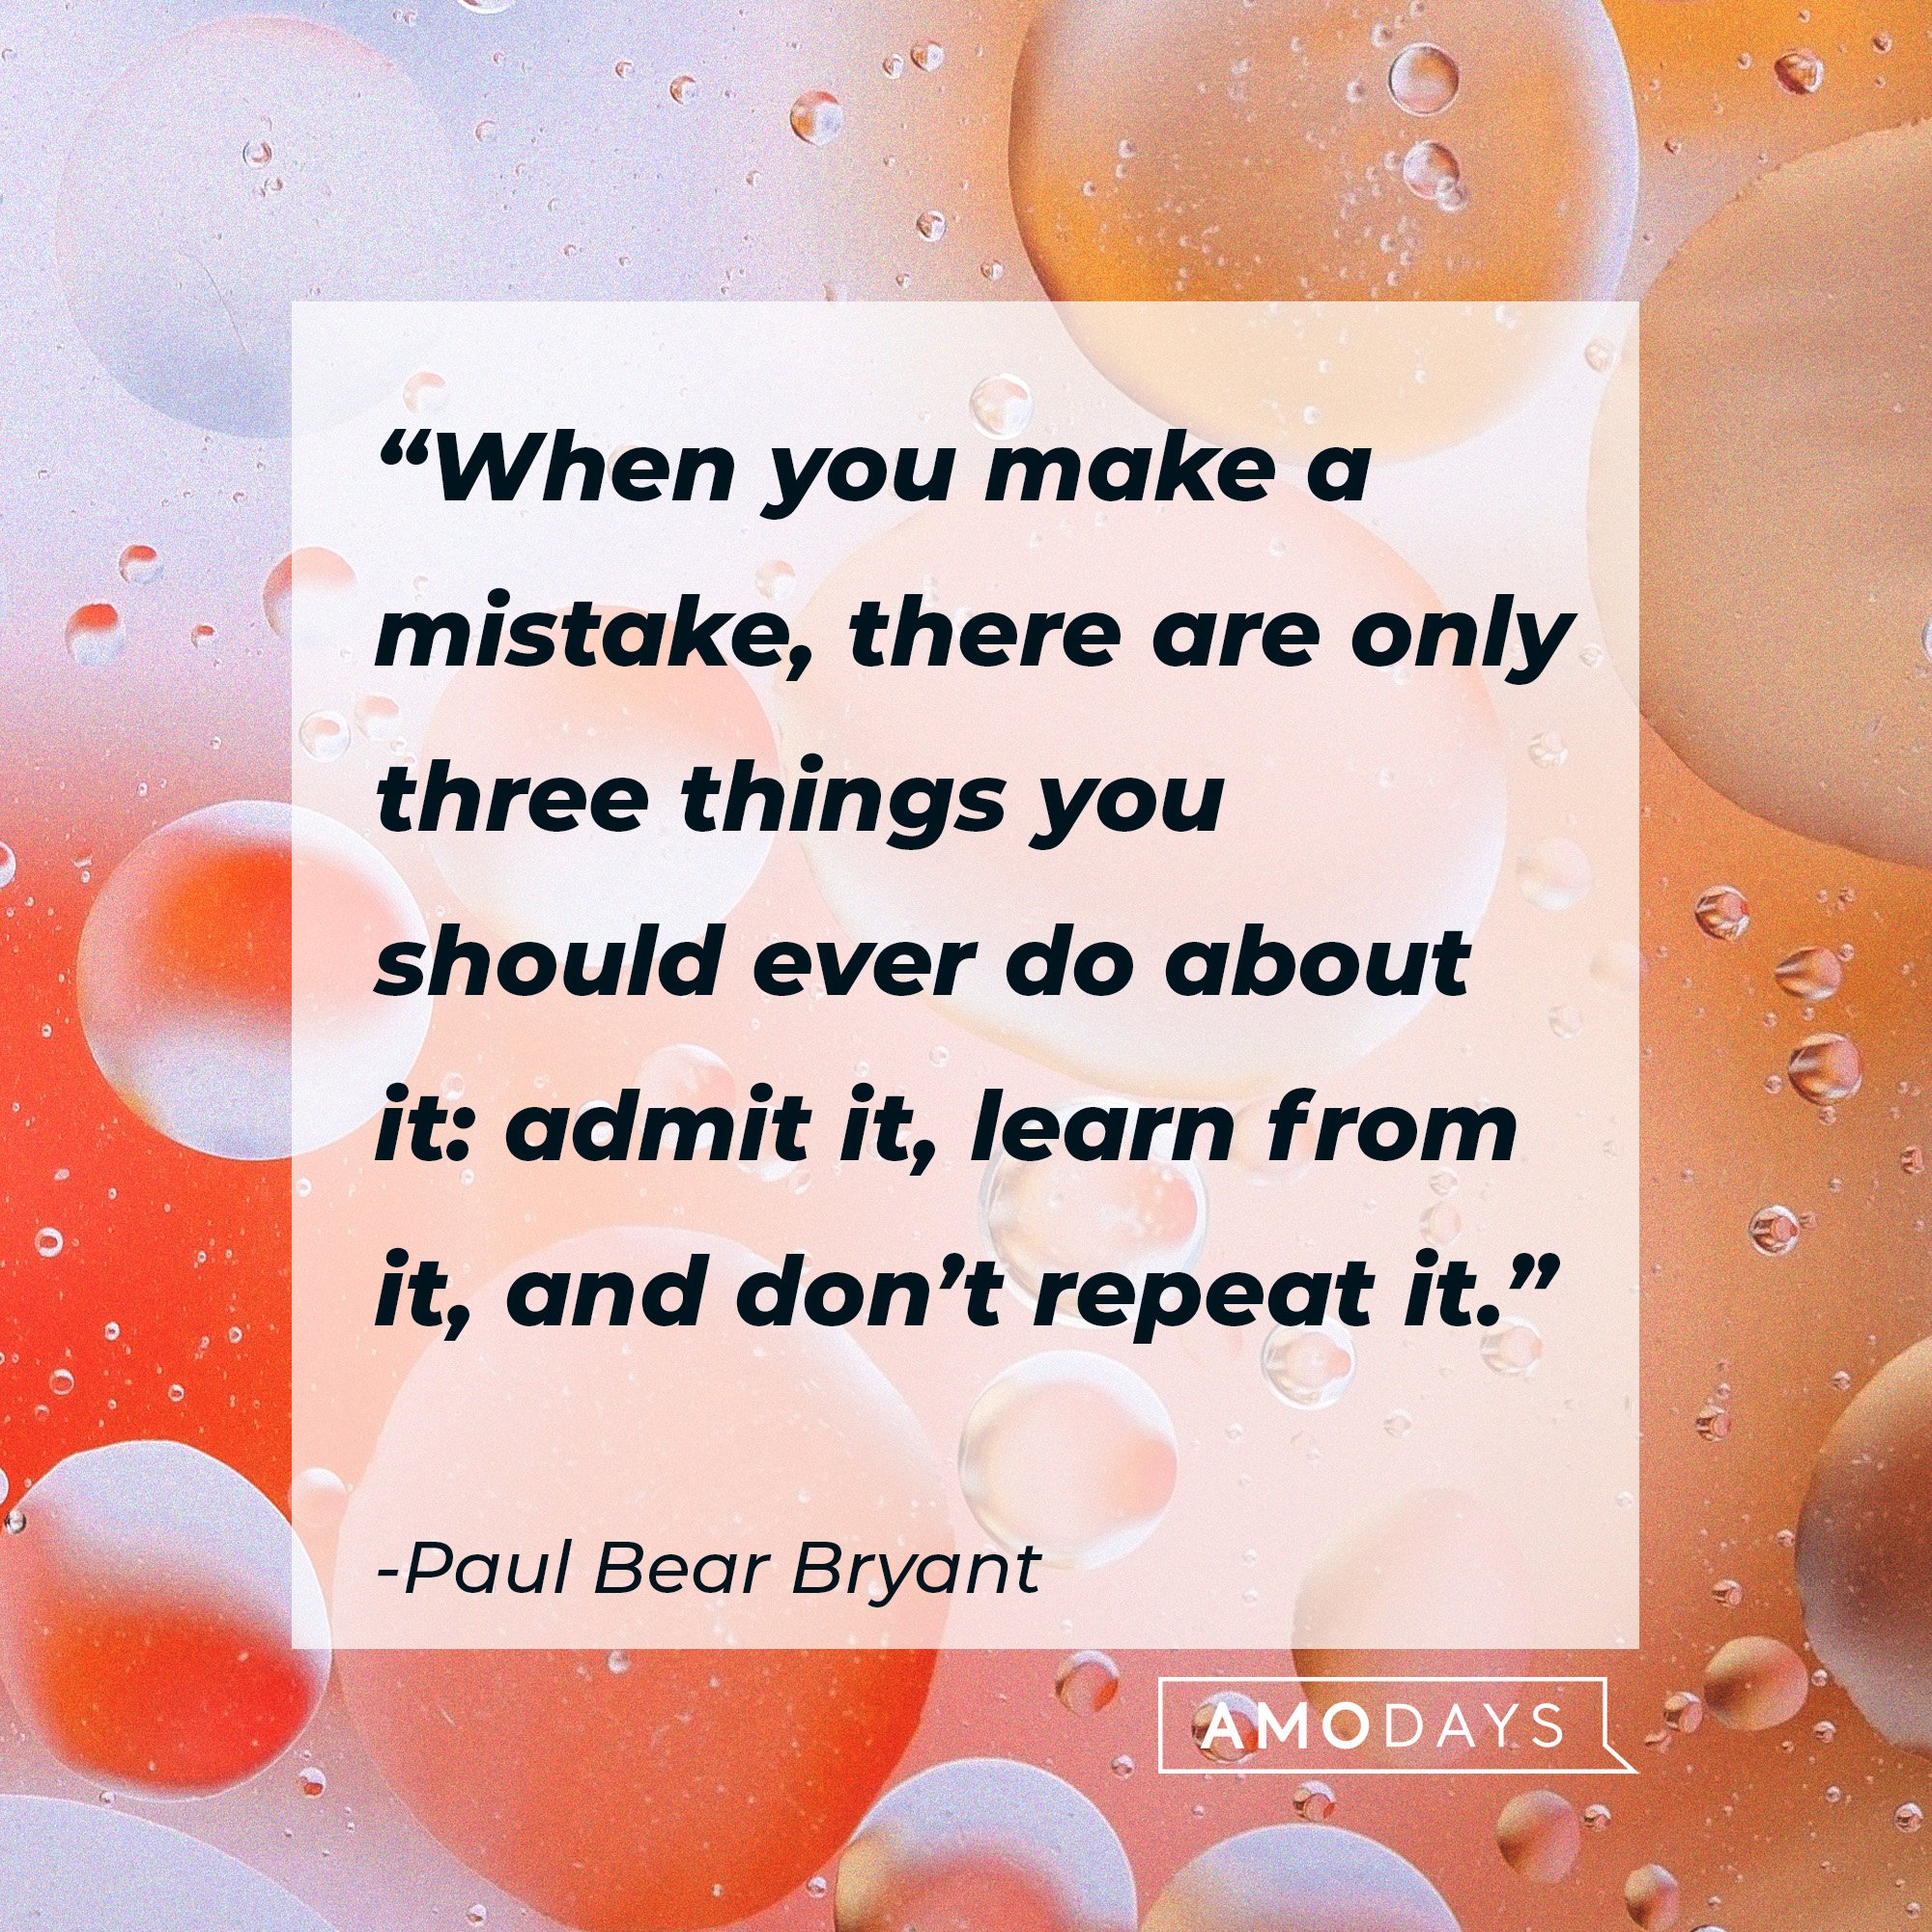 Paul Bear Bryan's quote: “When you make a mistake, there are only three things you should ever do about it: admit it, learn from it, and don’t repeat it.” | Image: AmoDayst